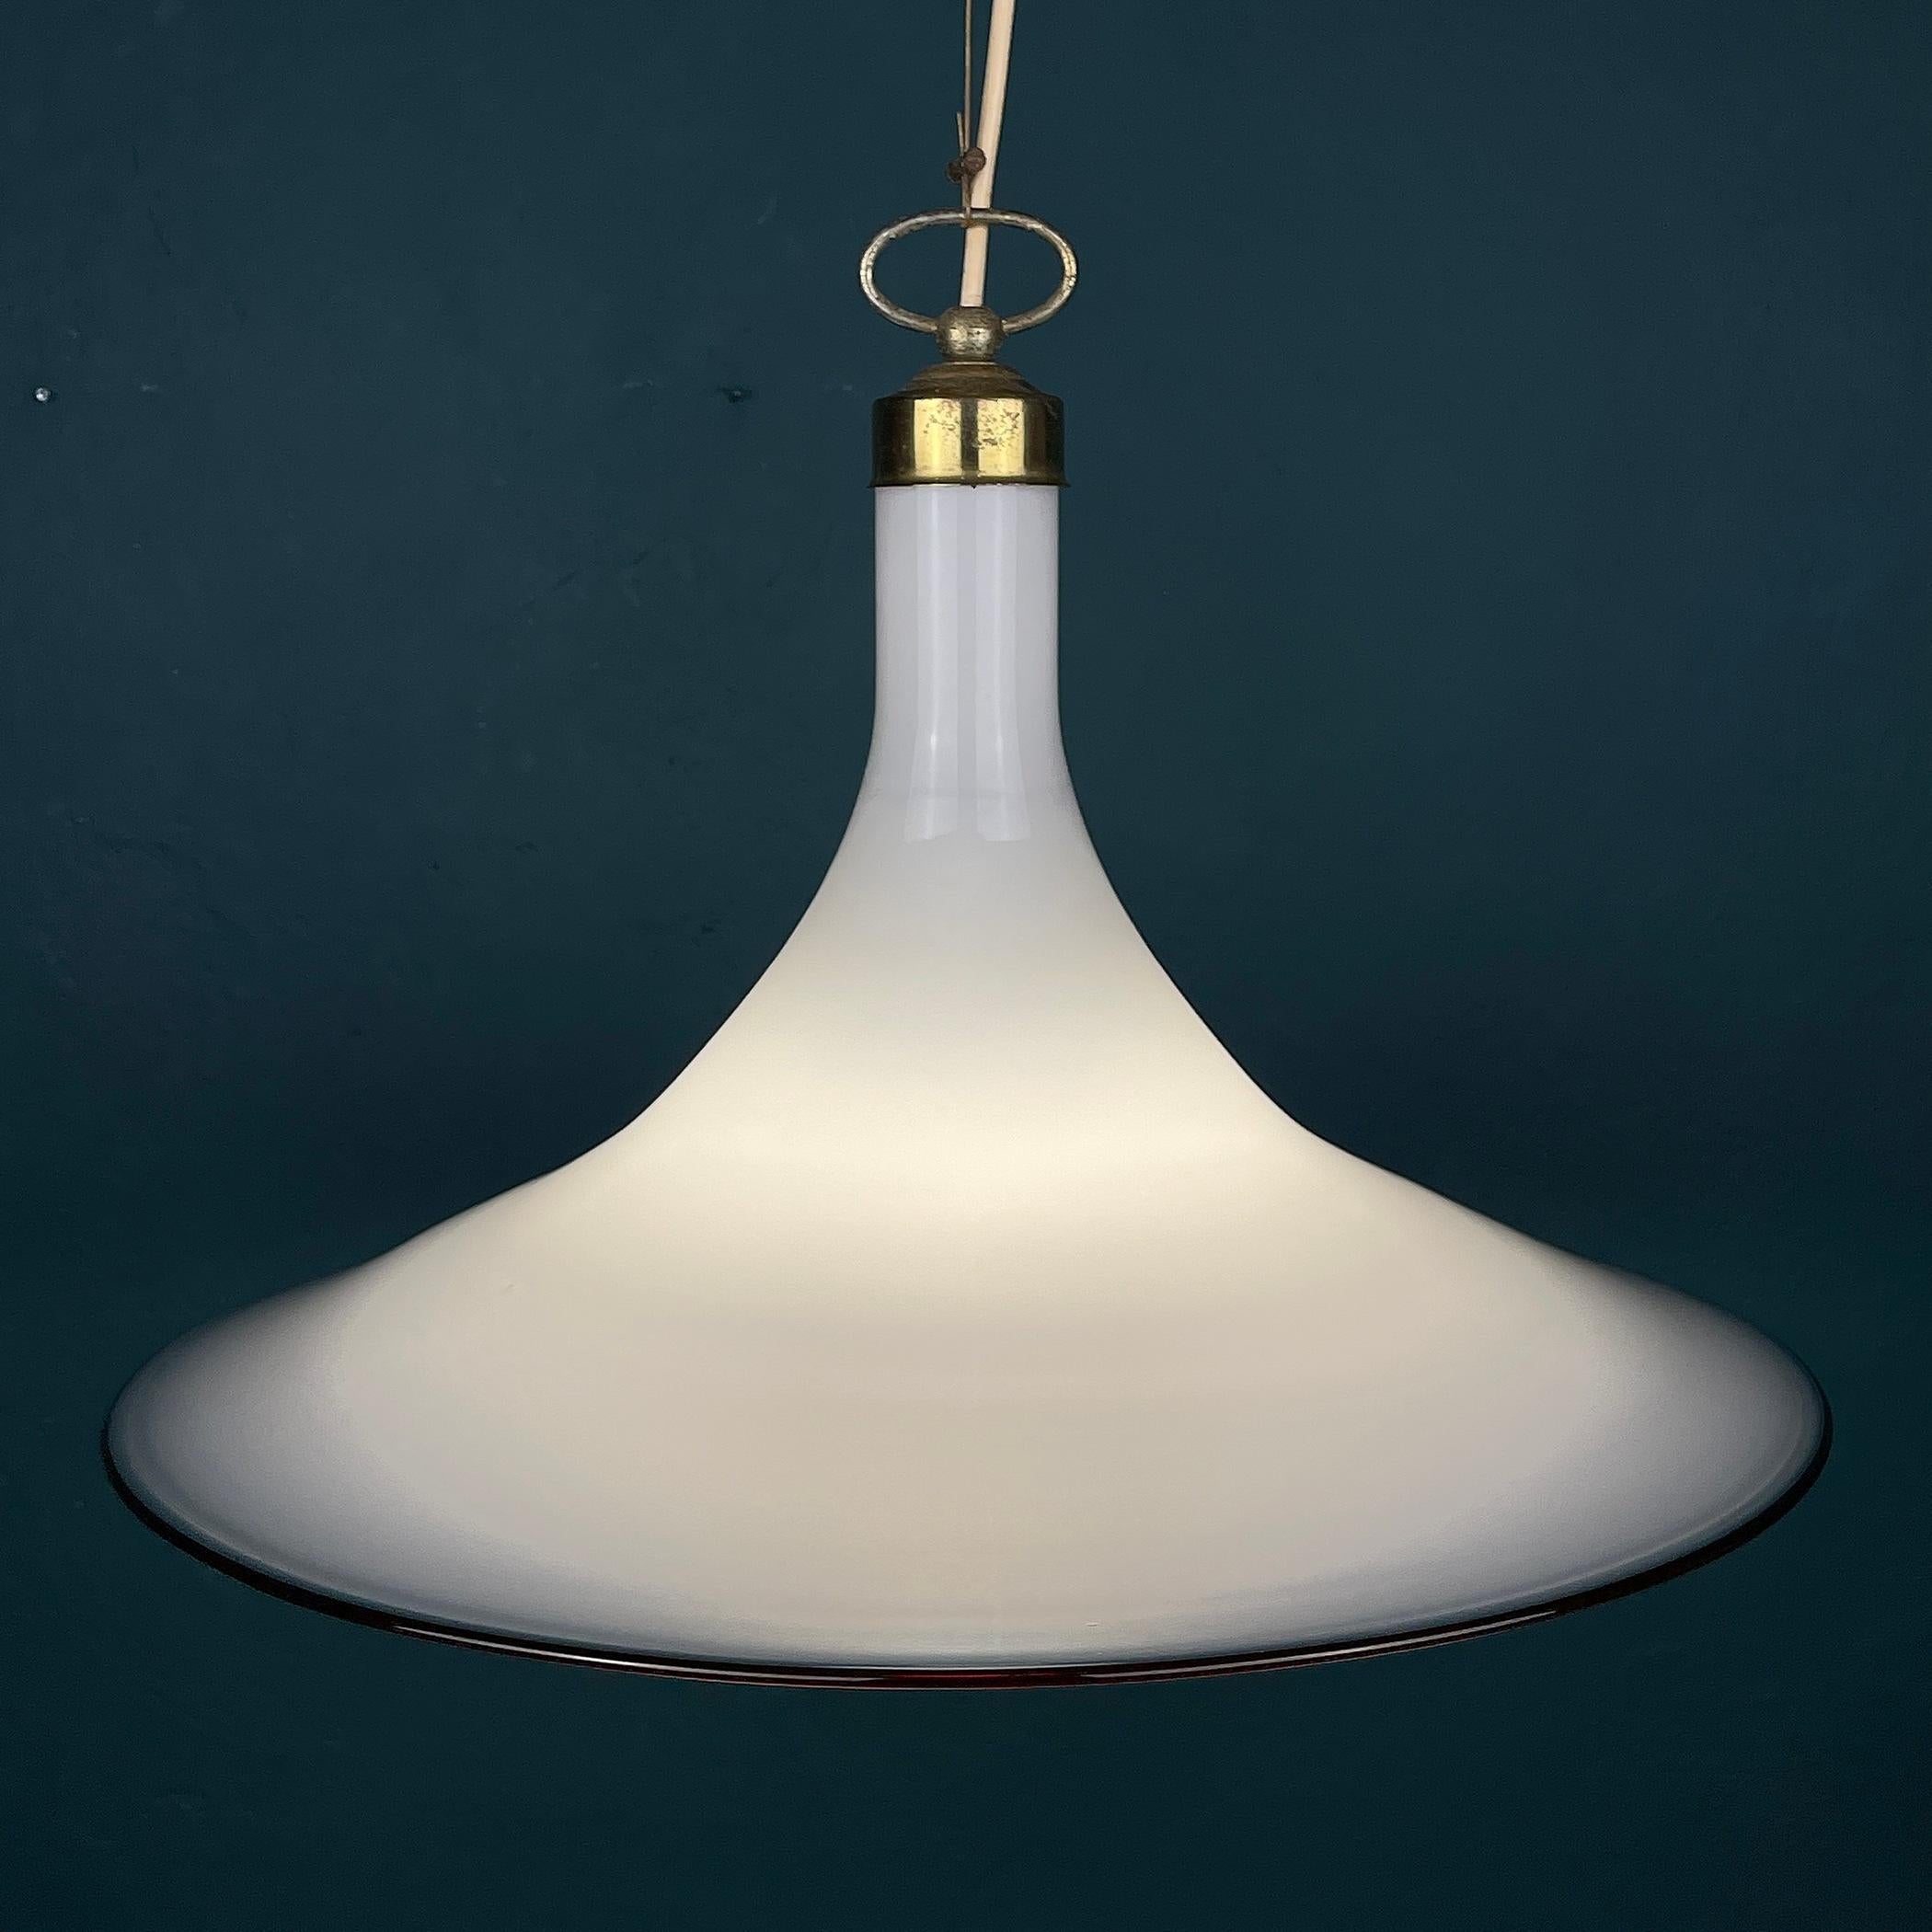 This mid-century Murano pendant lamp Tulip was made in Italy in the 70s. Very beautiful white Murano glass in the form of a tulip. Perfect vintage condition. No chips or cracks.
Requires a standard Edison E27 with a screw lamp. Chandelier height